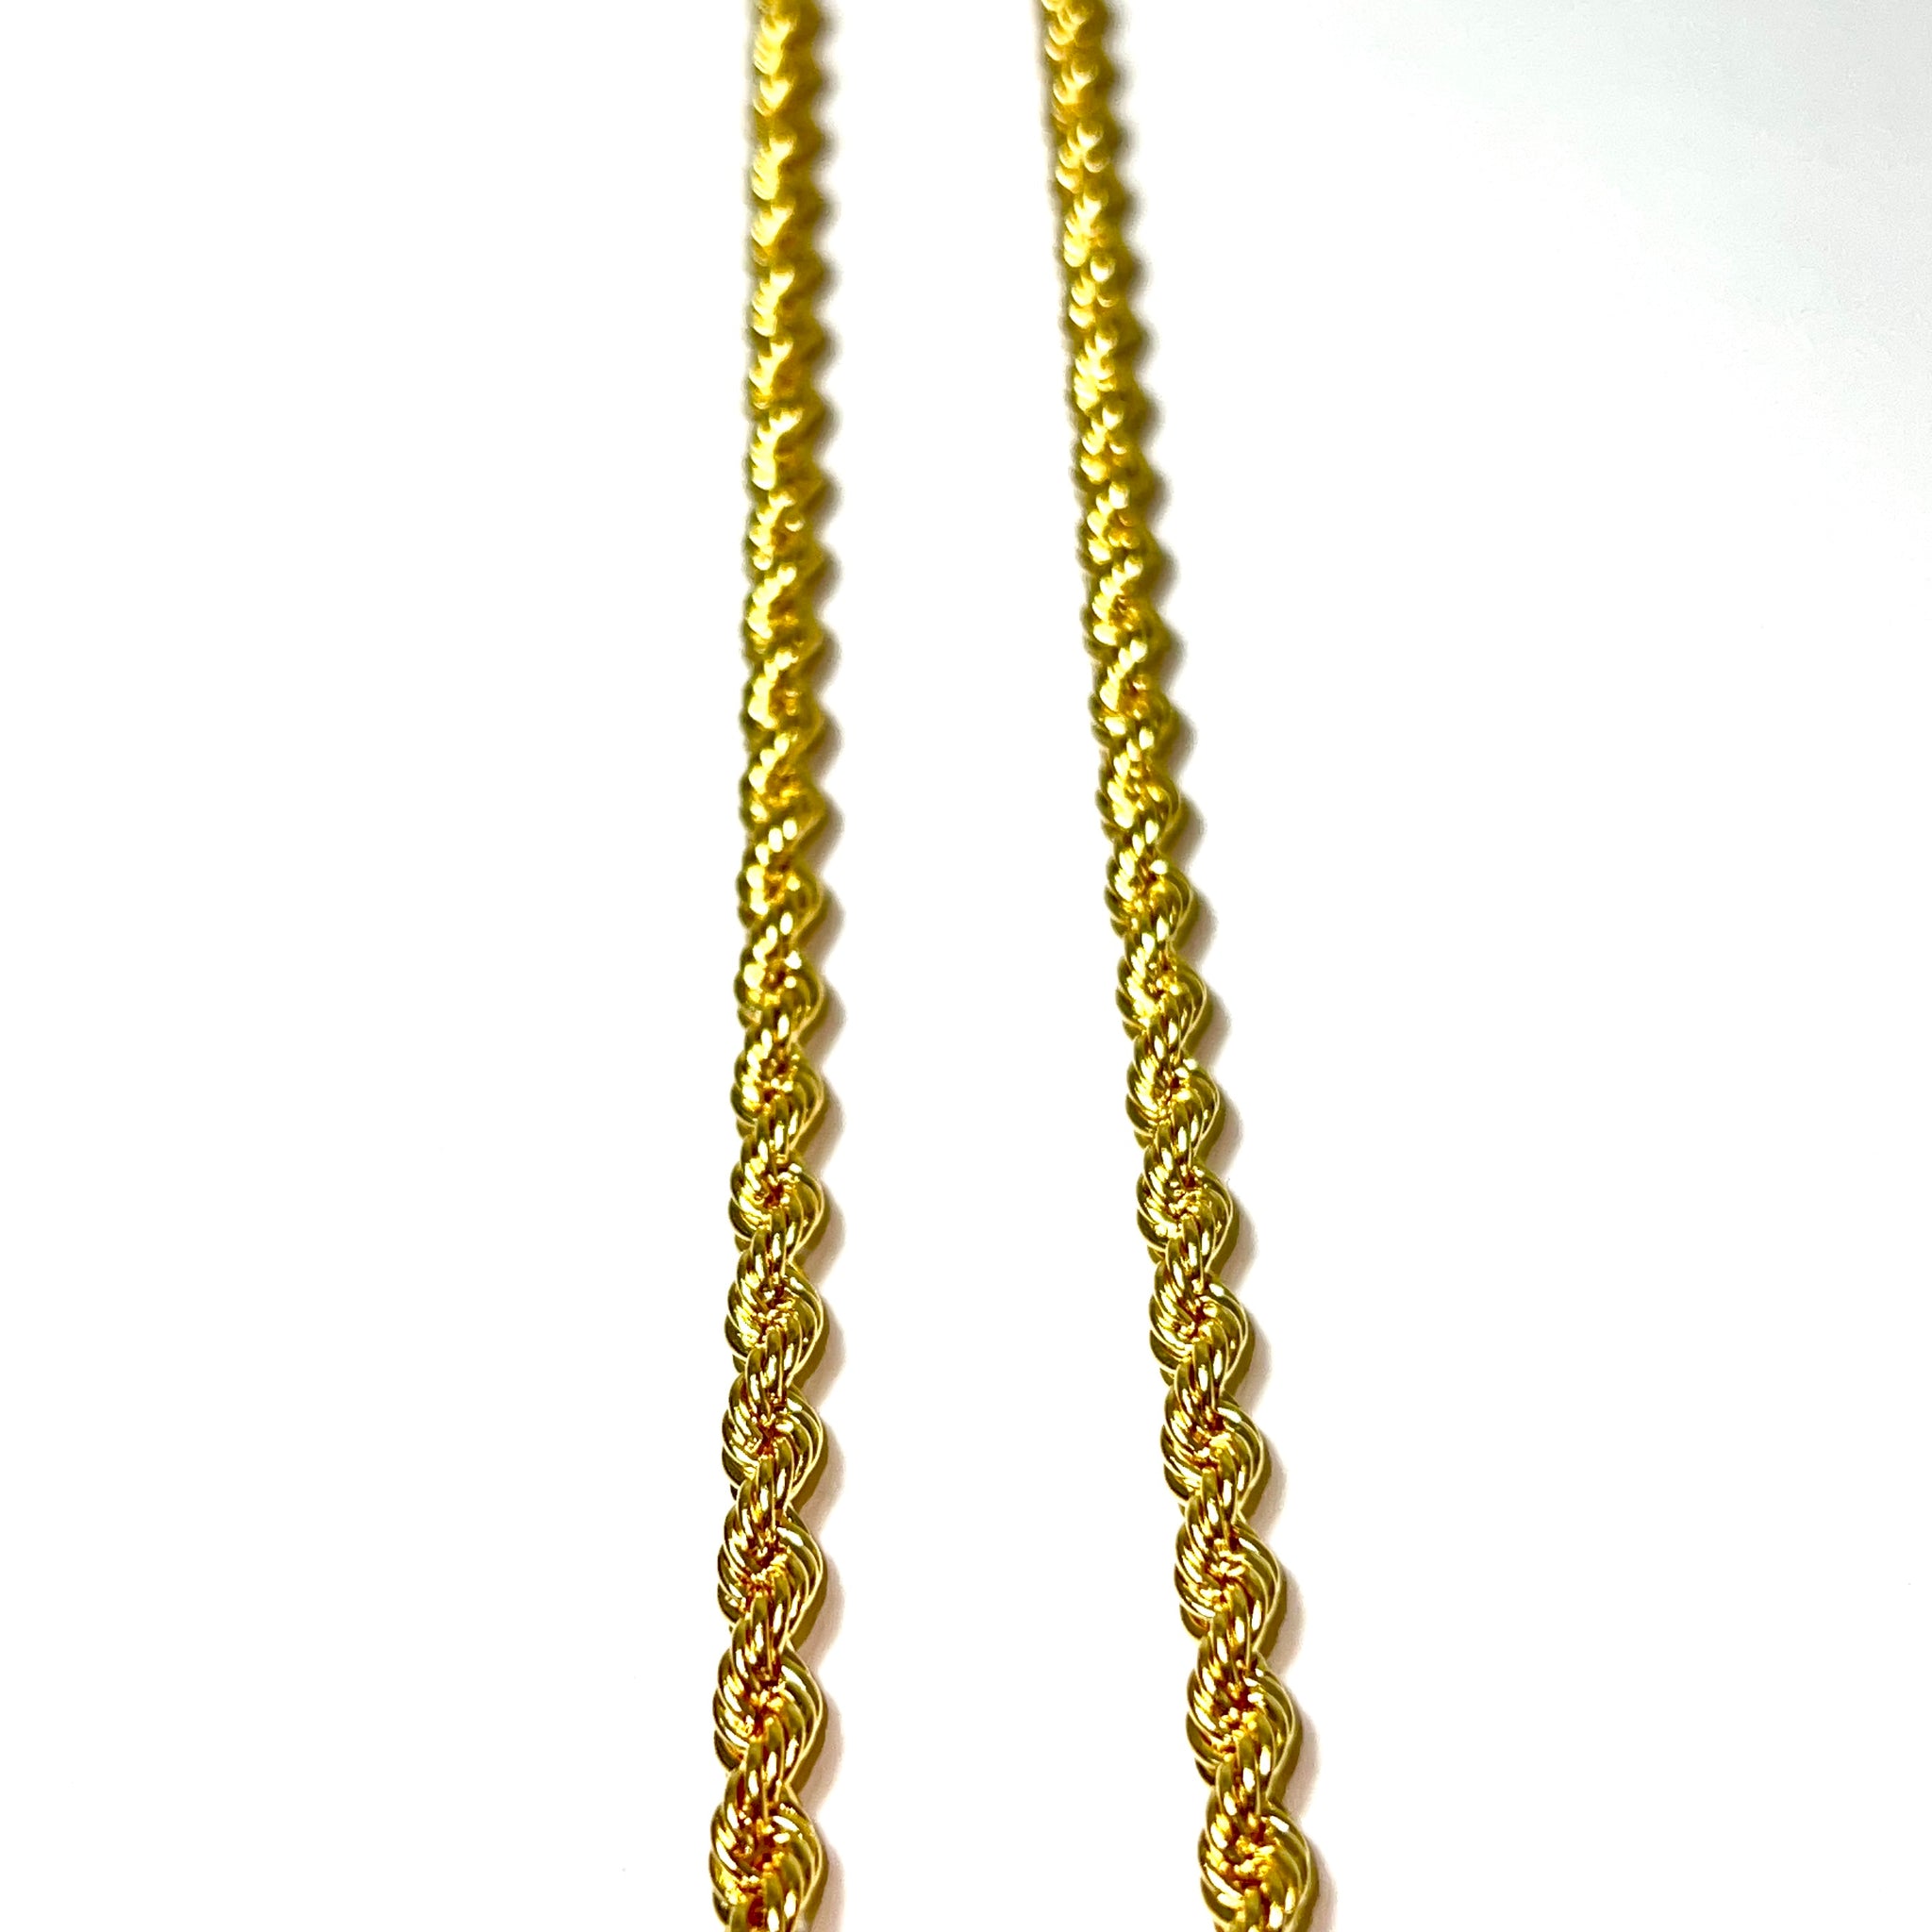 Rope Chain - 14 Carat Gold - 70cm / 5,5mm - 446